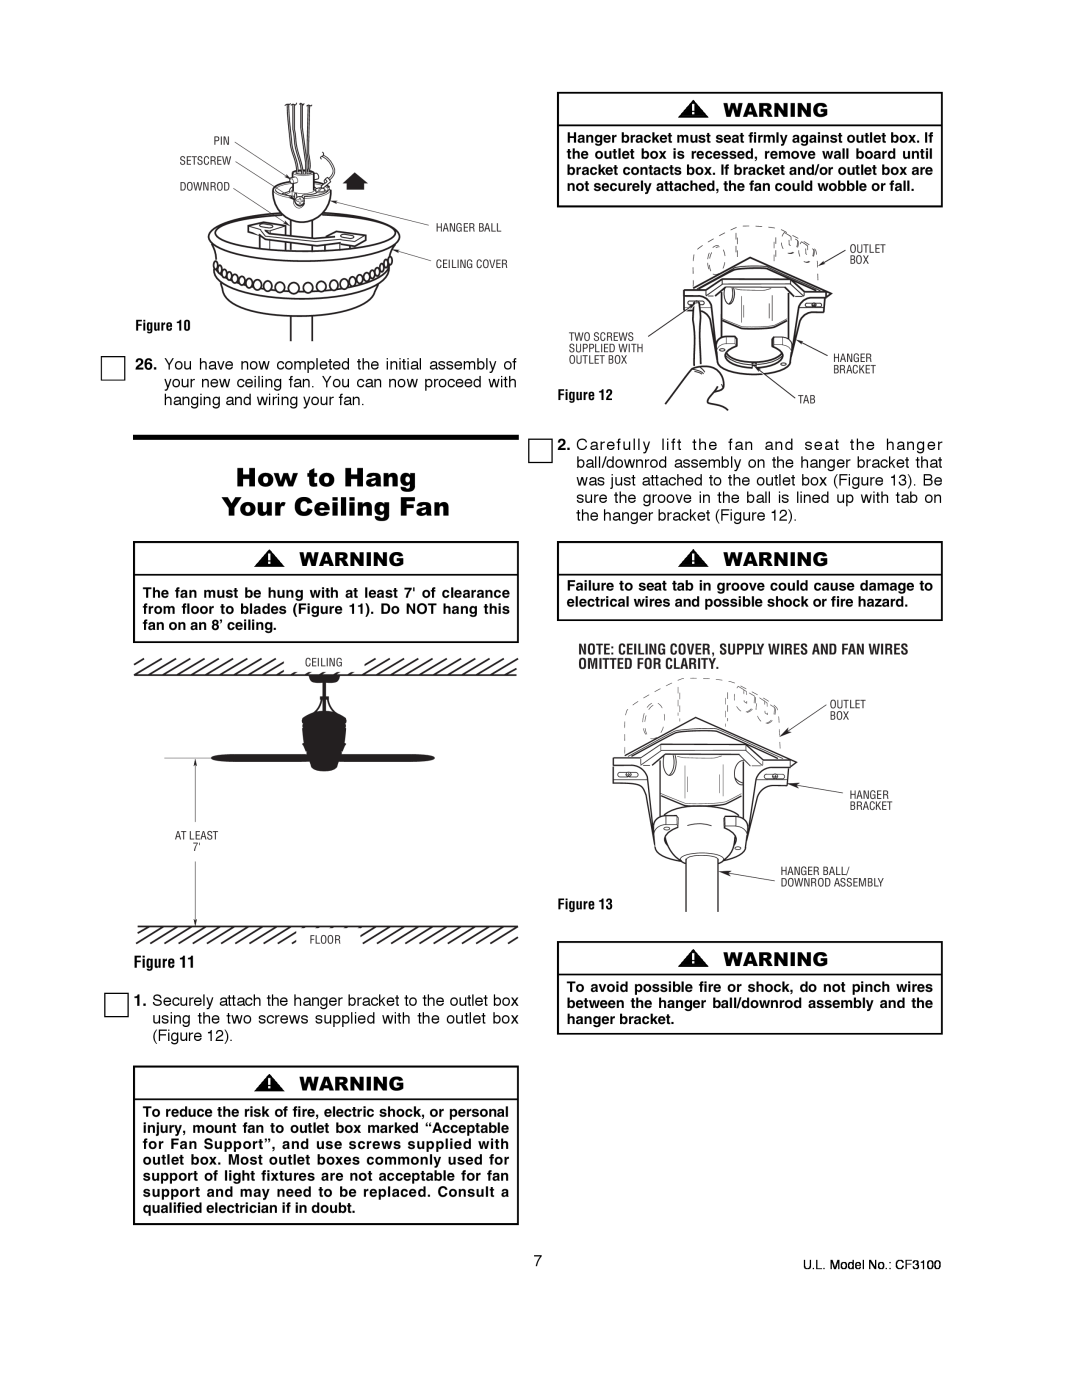 Emerson CF3100AGW00 How to Hang Your Ceiling Fan, Note Ceiling Cover, Supply Wires And Fan Wires Omitted For Clarity 